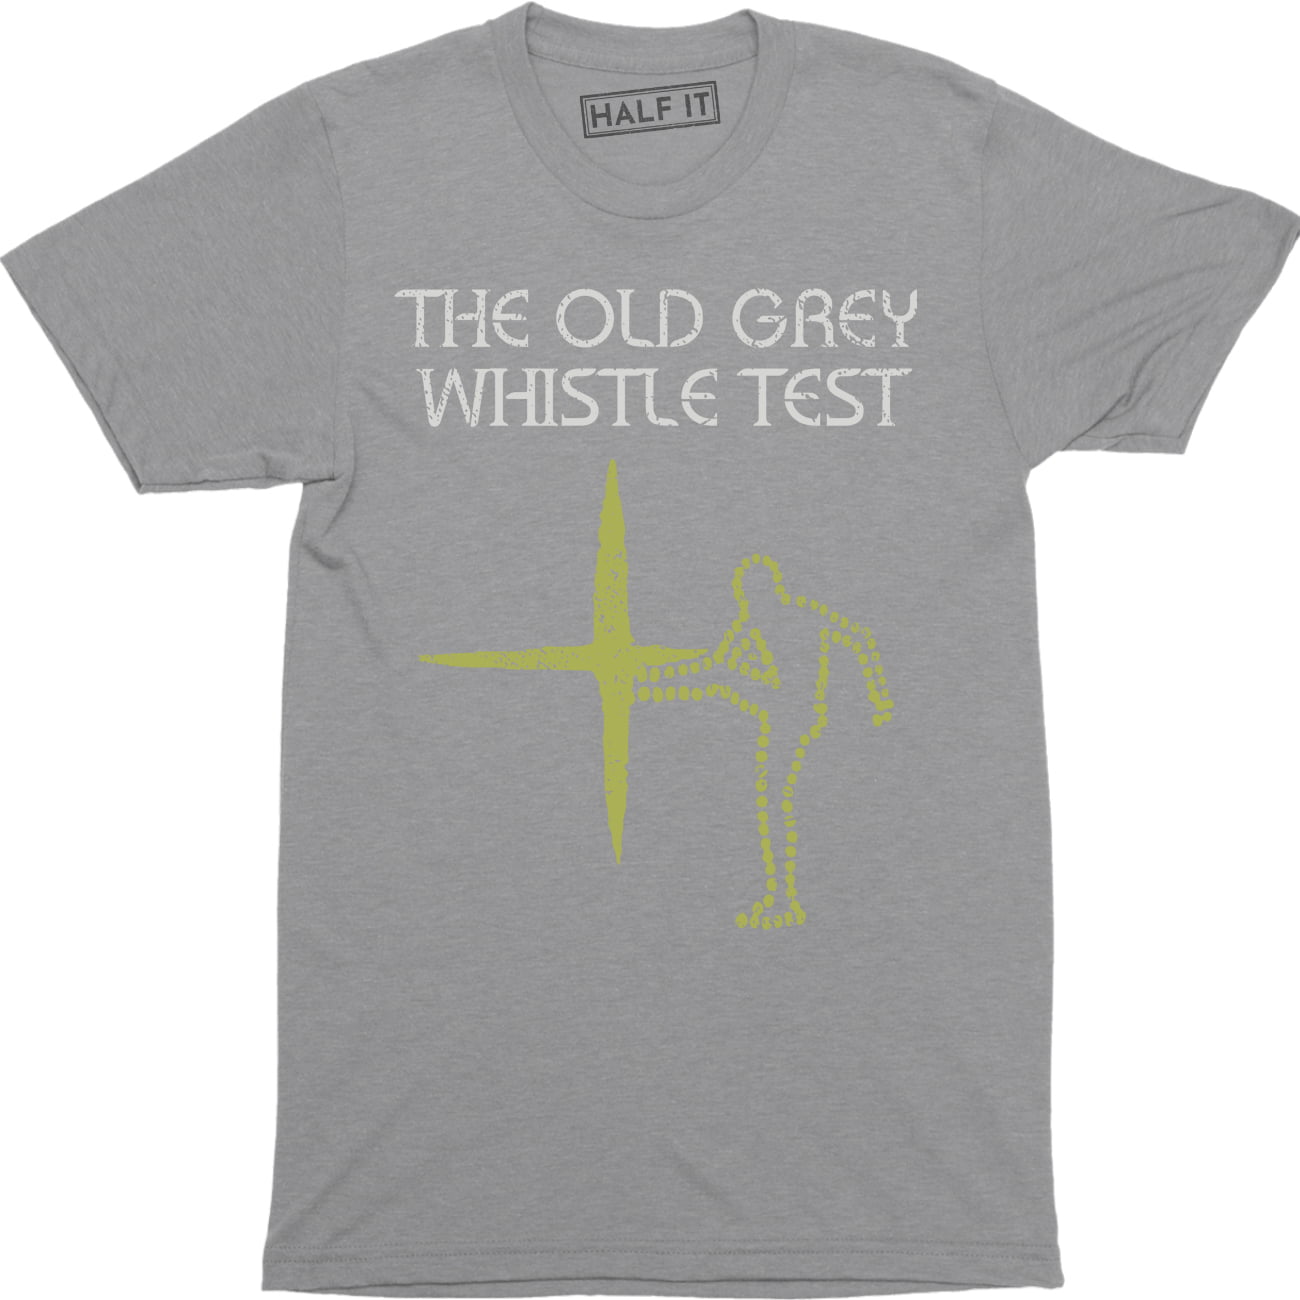 Old Grey Whistle Test Cult Tv Classic Rock Movie Tv Show Nerd Geek Gamer T Shirt